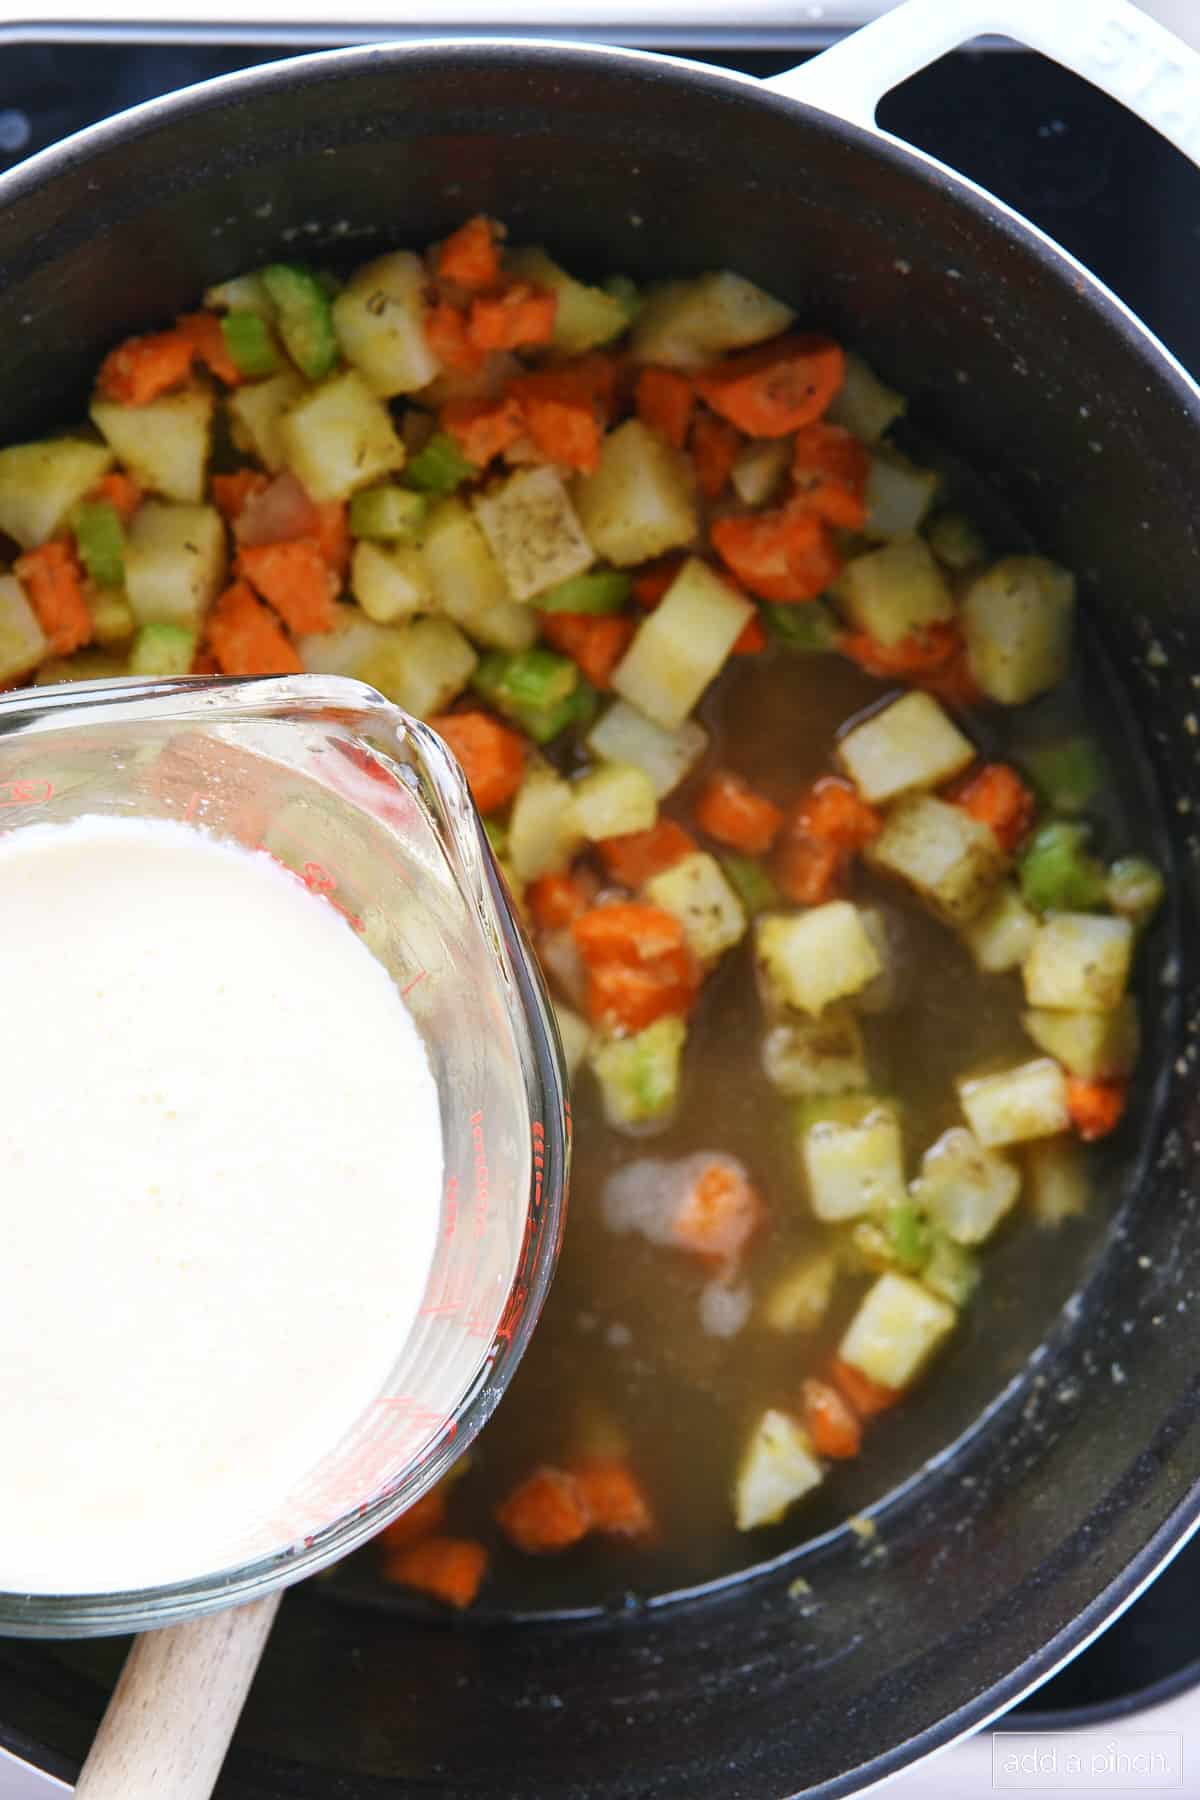 Cream being added to potatoes, carrots, and celery in a dutch oven.